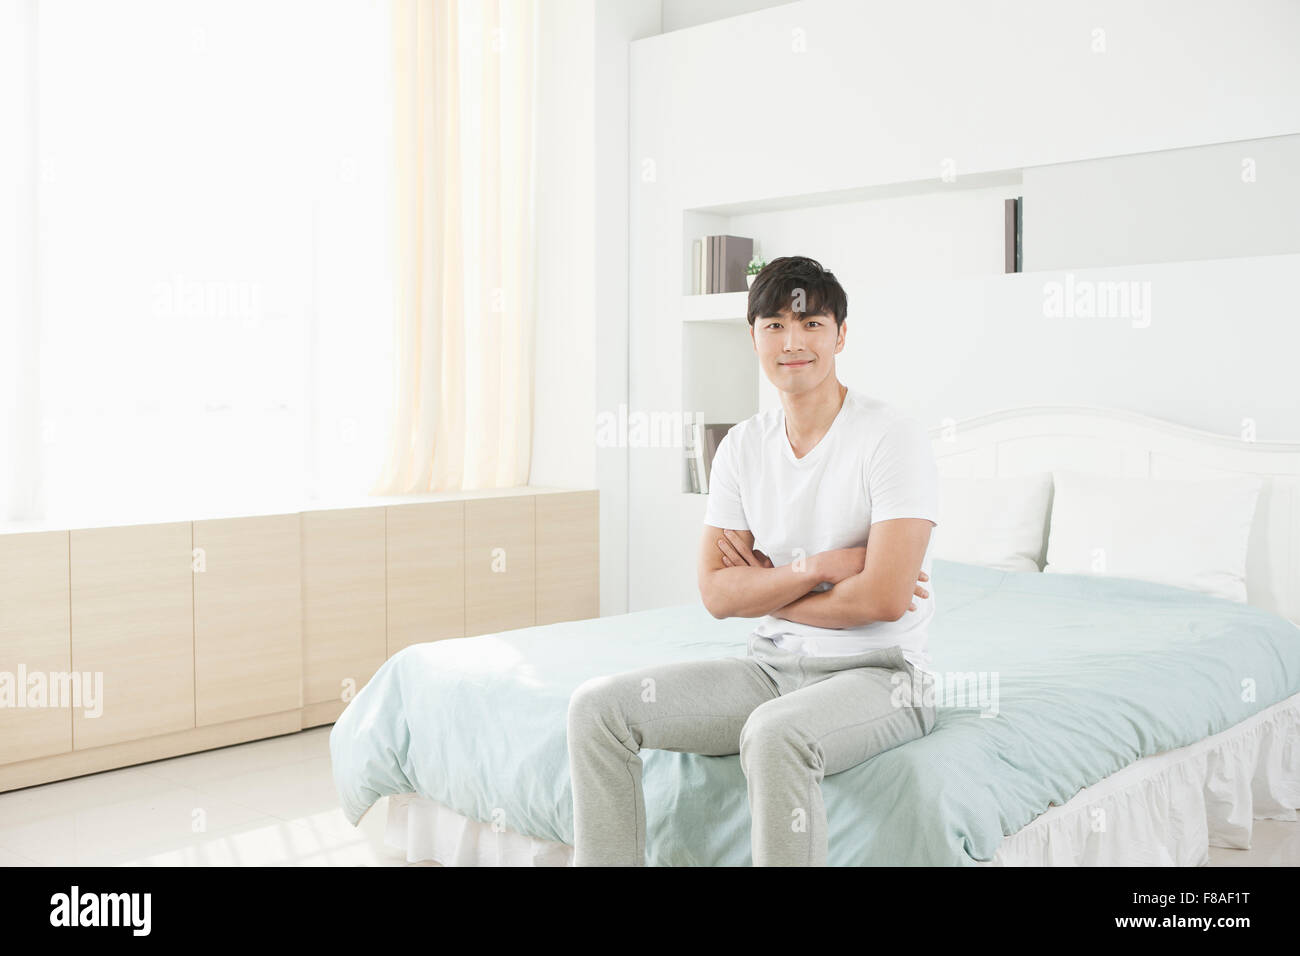 Man sitting on the edge of the bed Stock Photo